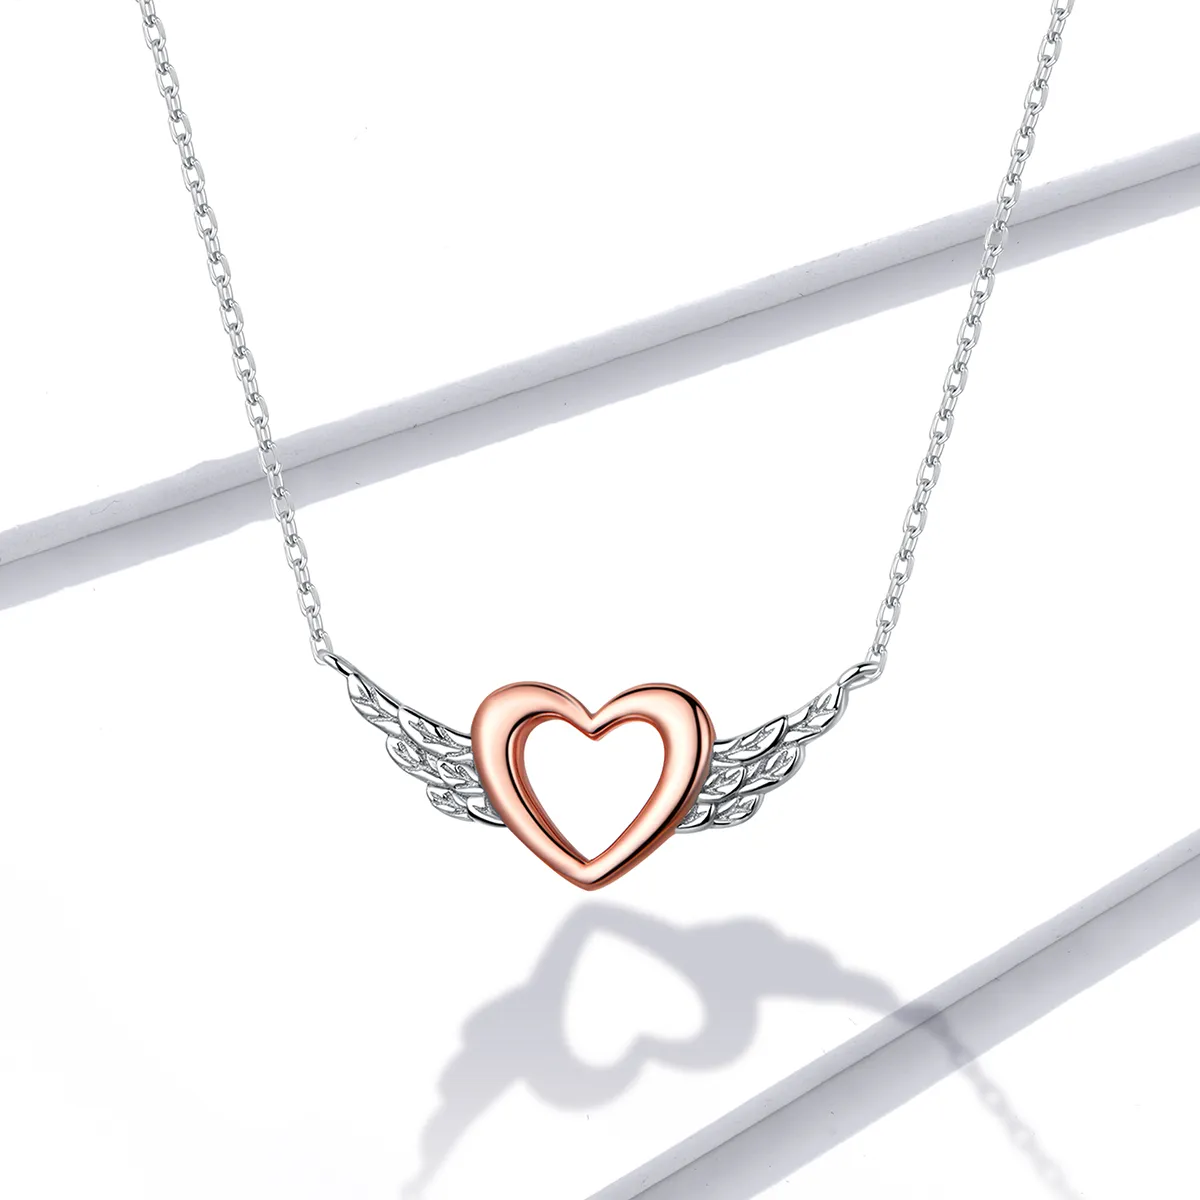 Pandora Style Two Tone Bicolor Heart Wing Pendant Necklace - BSN162